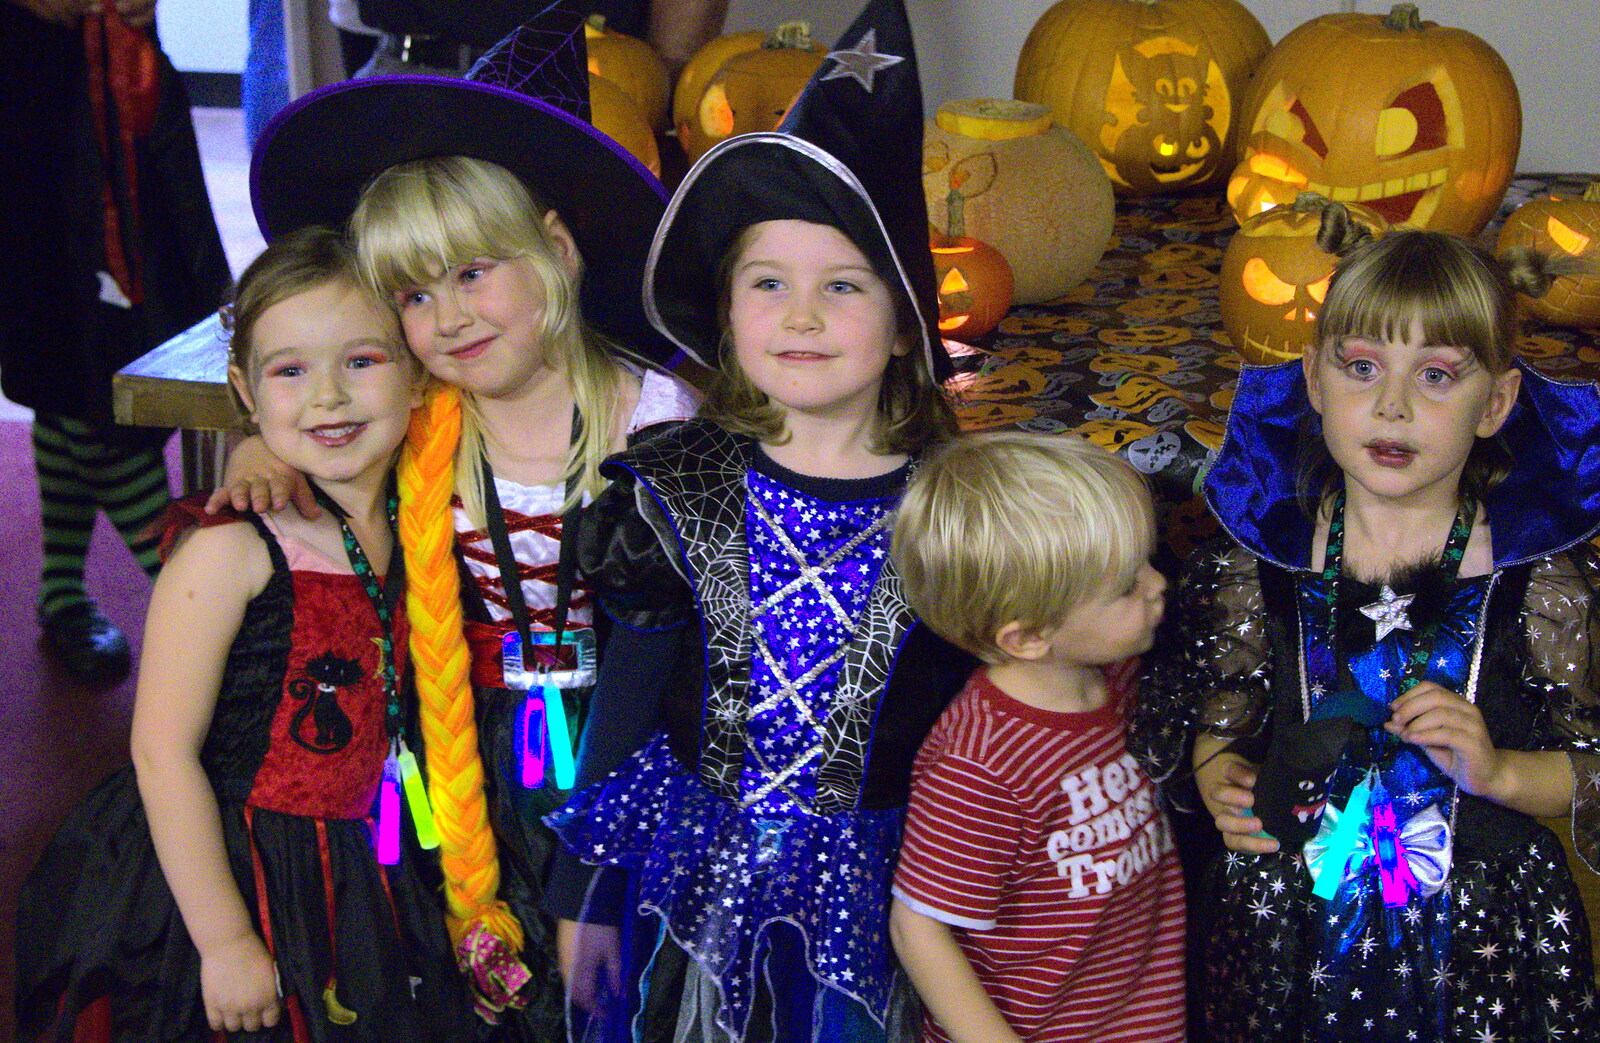 Harry and the girls from A Halloween Party at the Village Hall, Brome, Suffolk - 31st October 2014